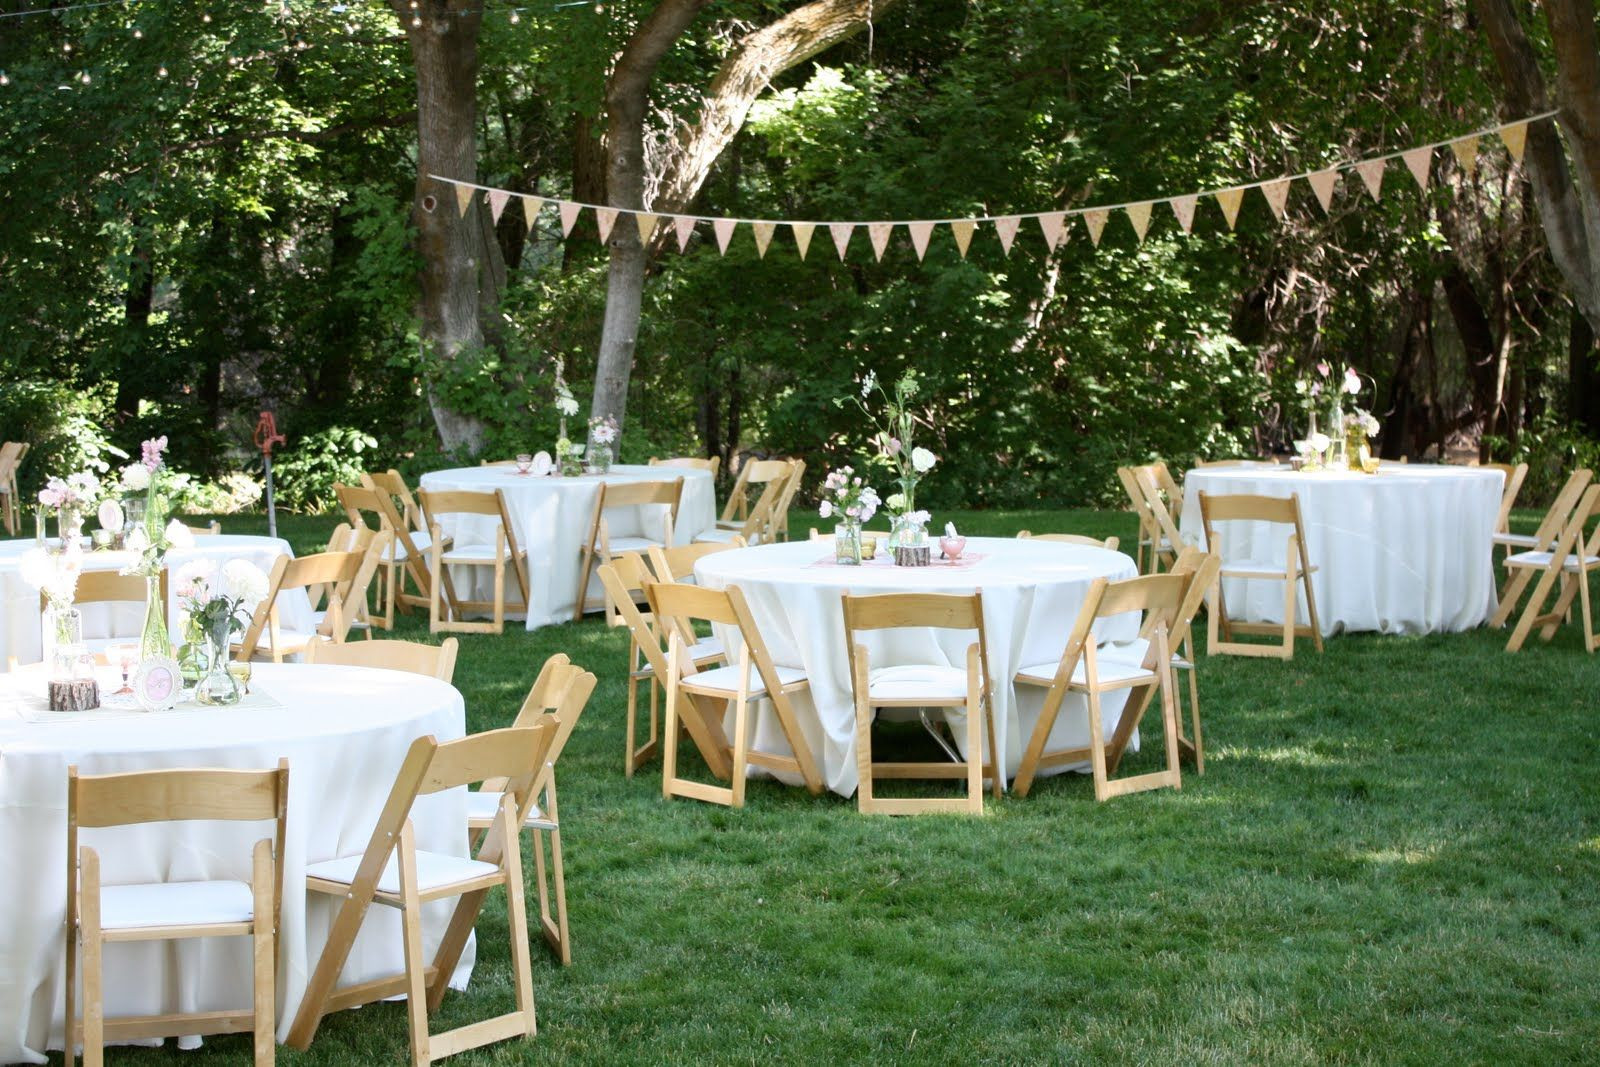 Ideas And Designs For A Backyard Engagement Party
 backyard wedding reception decoration ideas